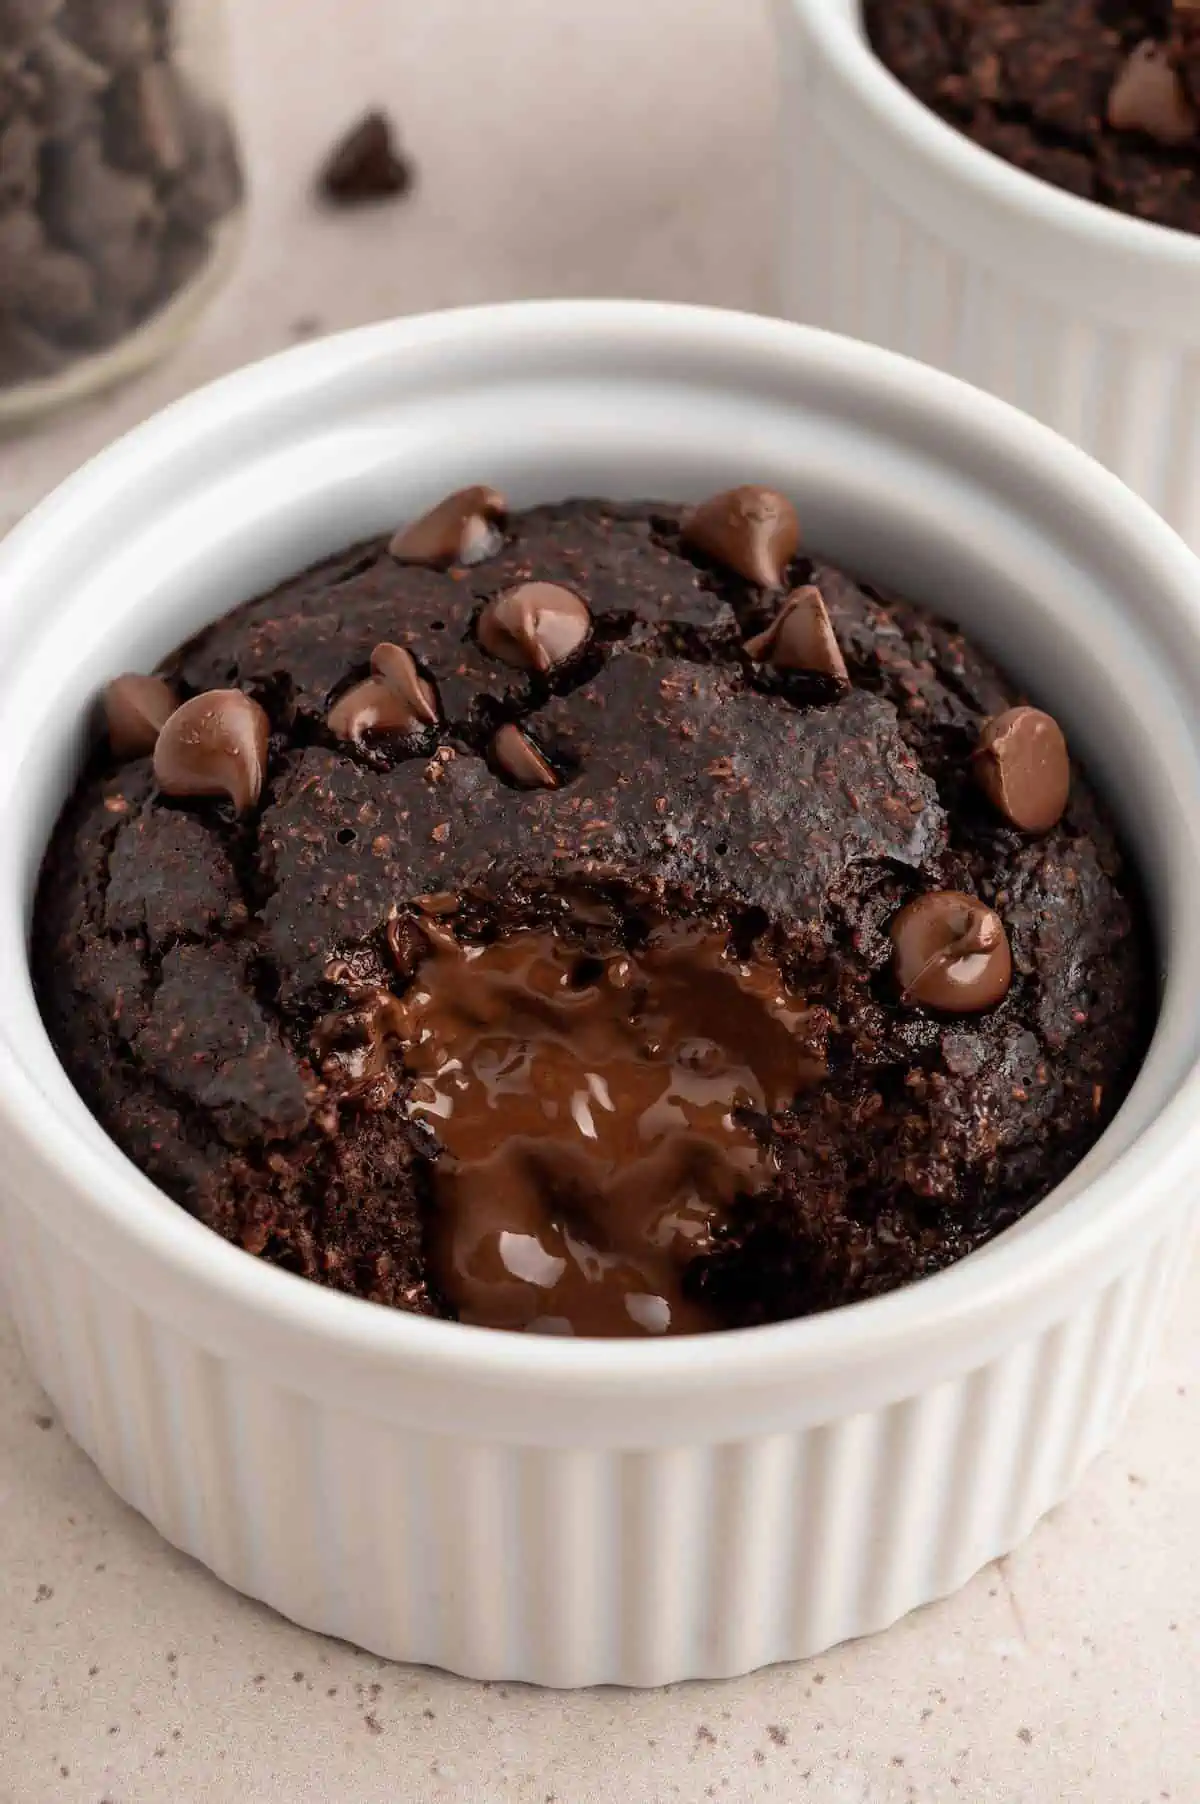 Chocolate baked oats protein mug cake with a bite missing and melted chocolate revealed.